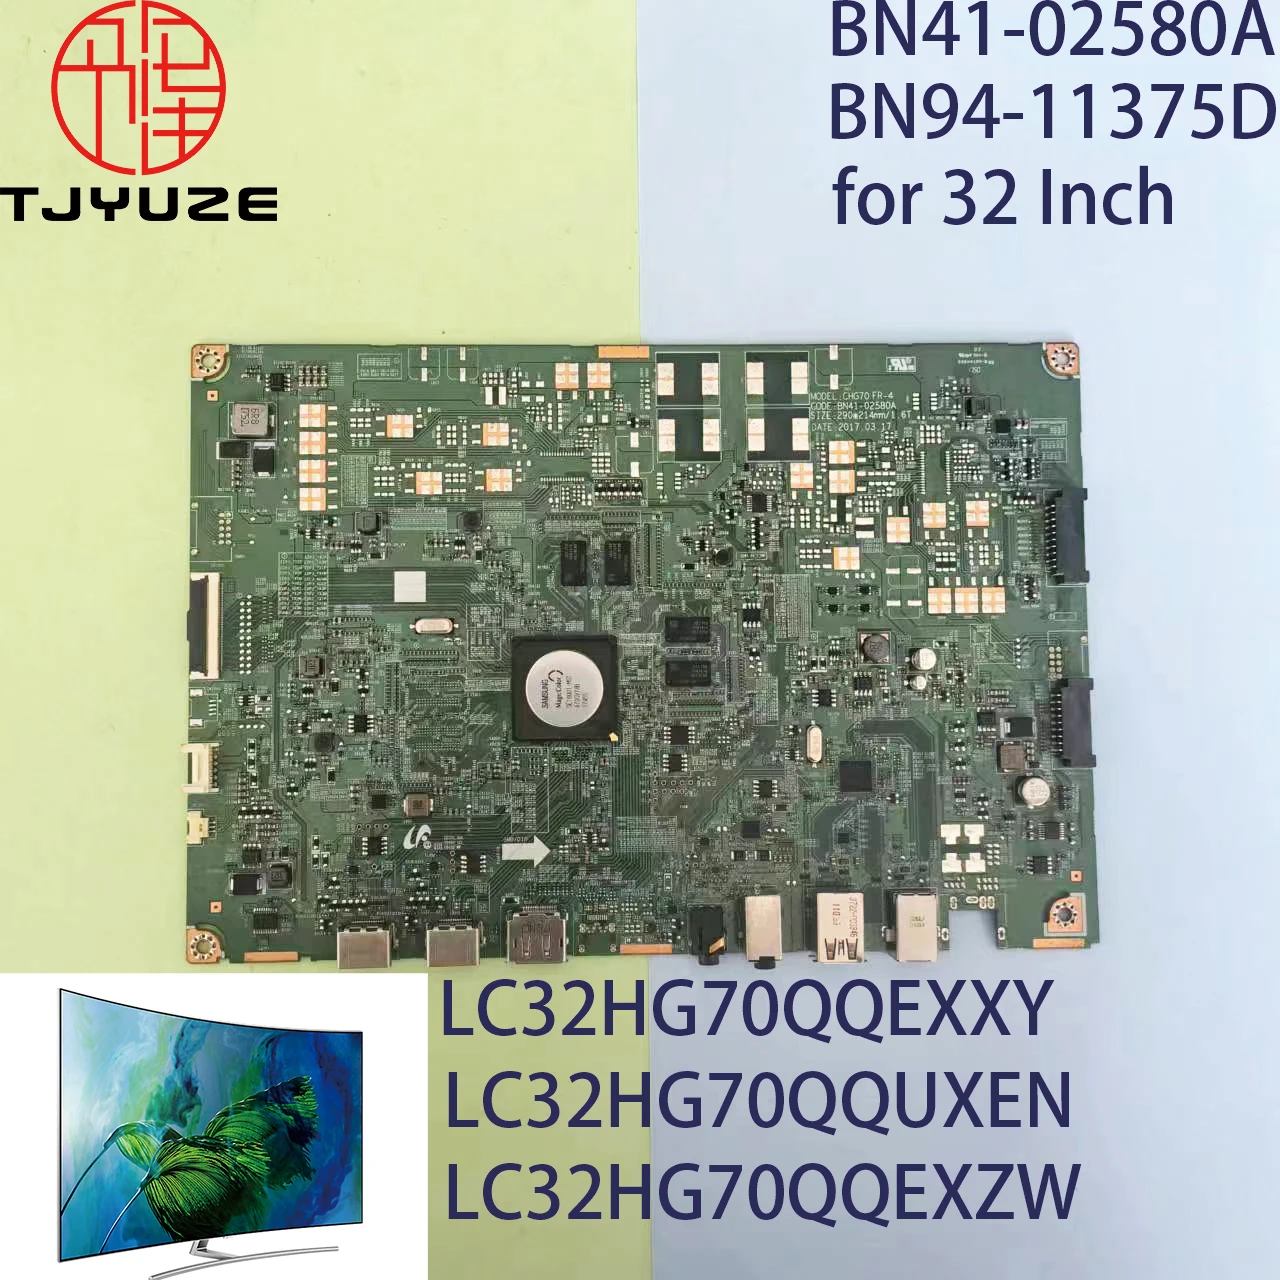 

BN41-02580A BN94-11375D 32 Inch TV Motherboard Working Properly for LC32HG70QQEXXY LC32HG70QQUXEN LC32HG70QQEXZW Main Board